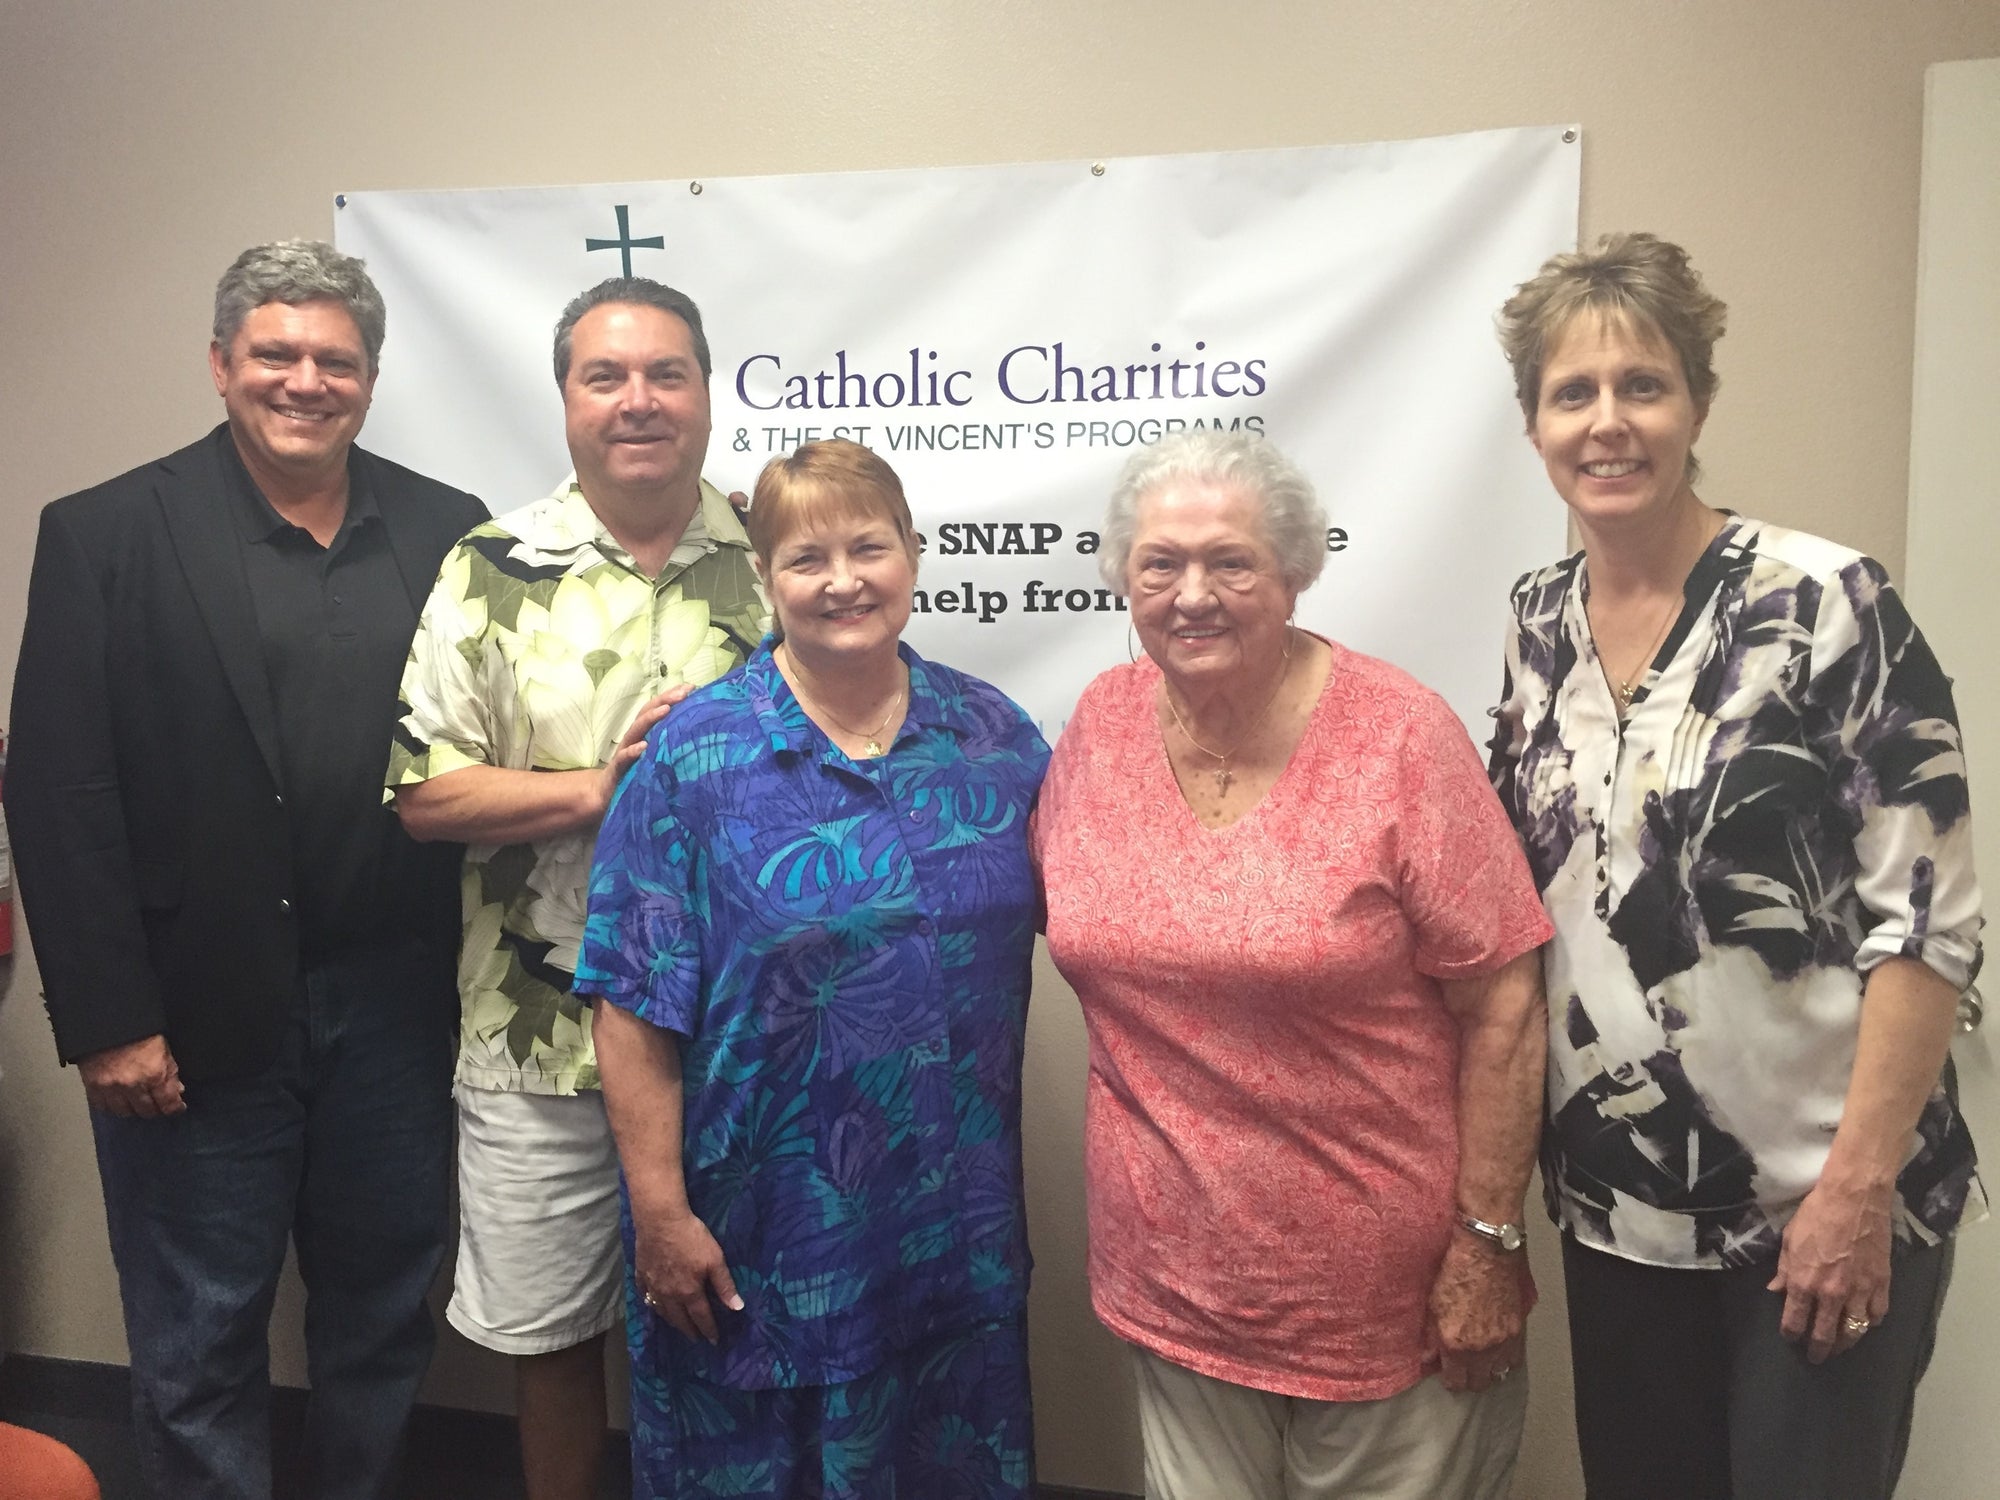 Local Couple Makes Generous Donation to Catholic Charities